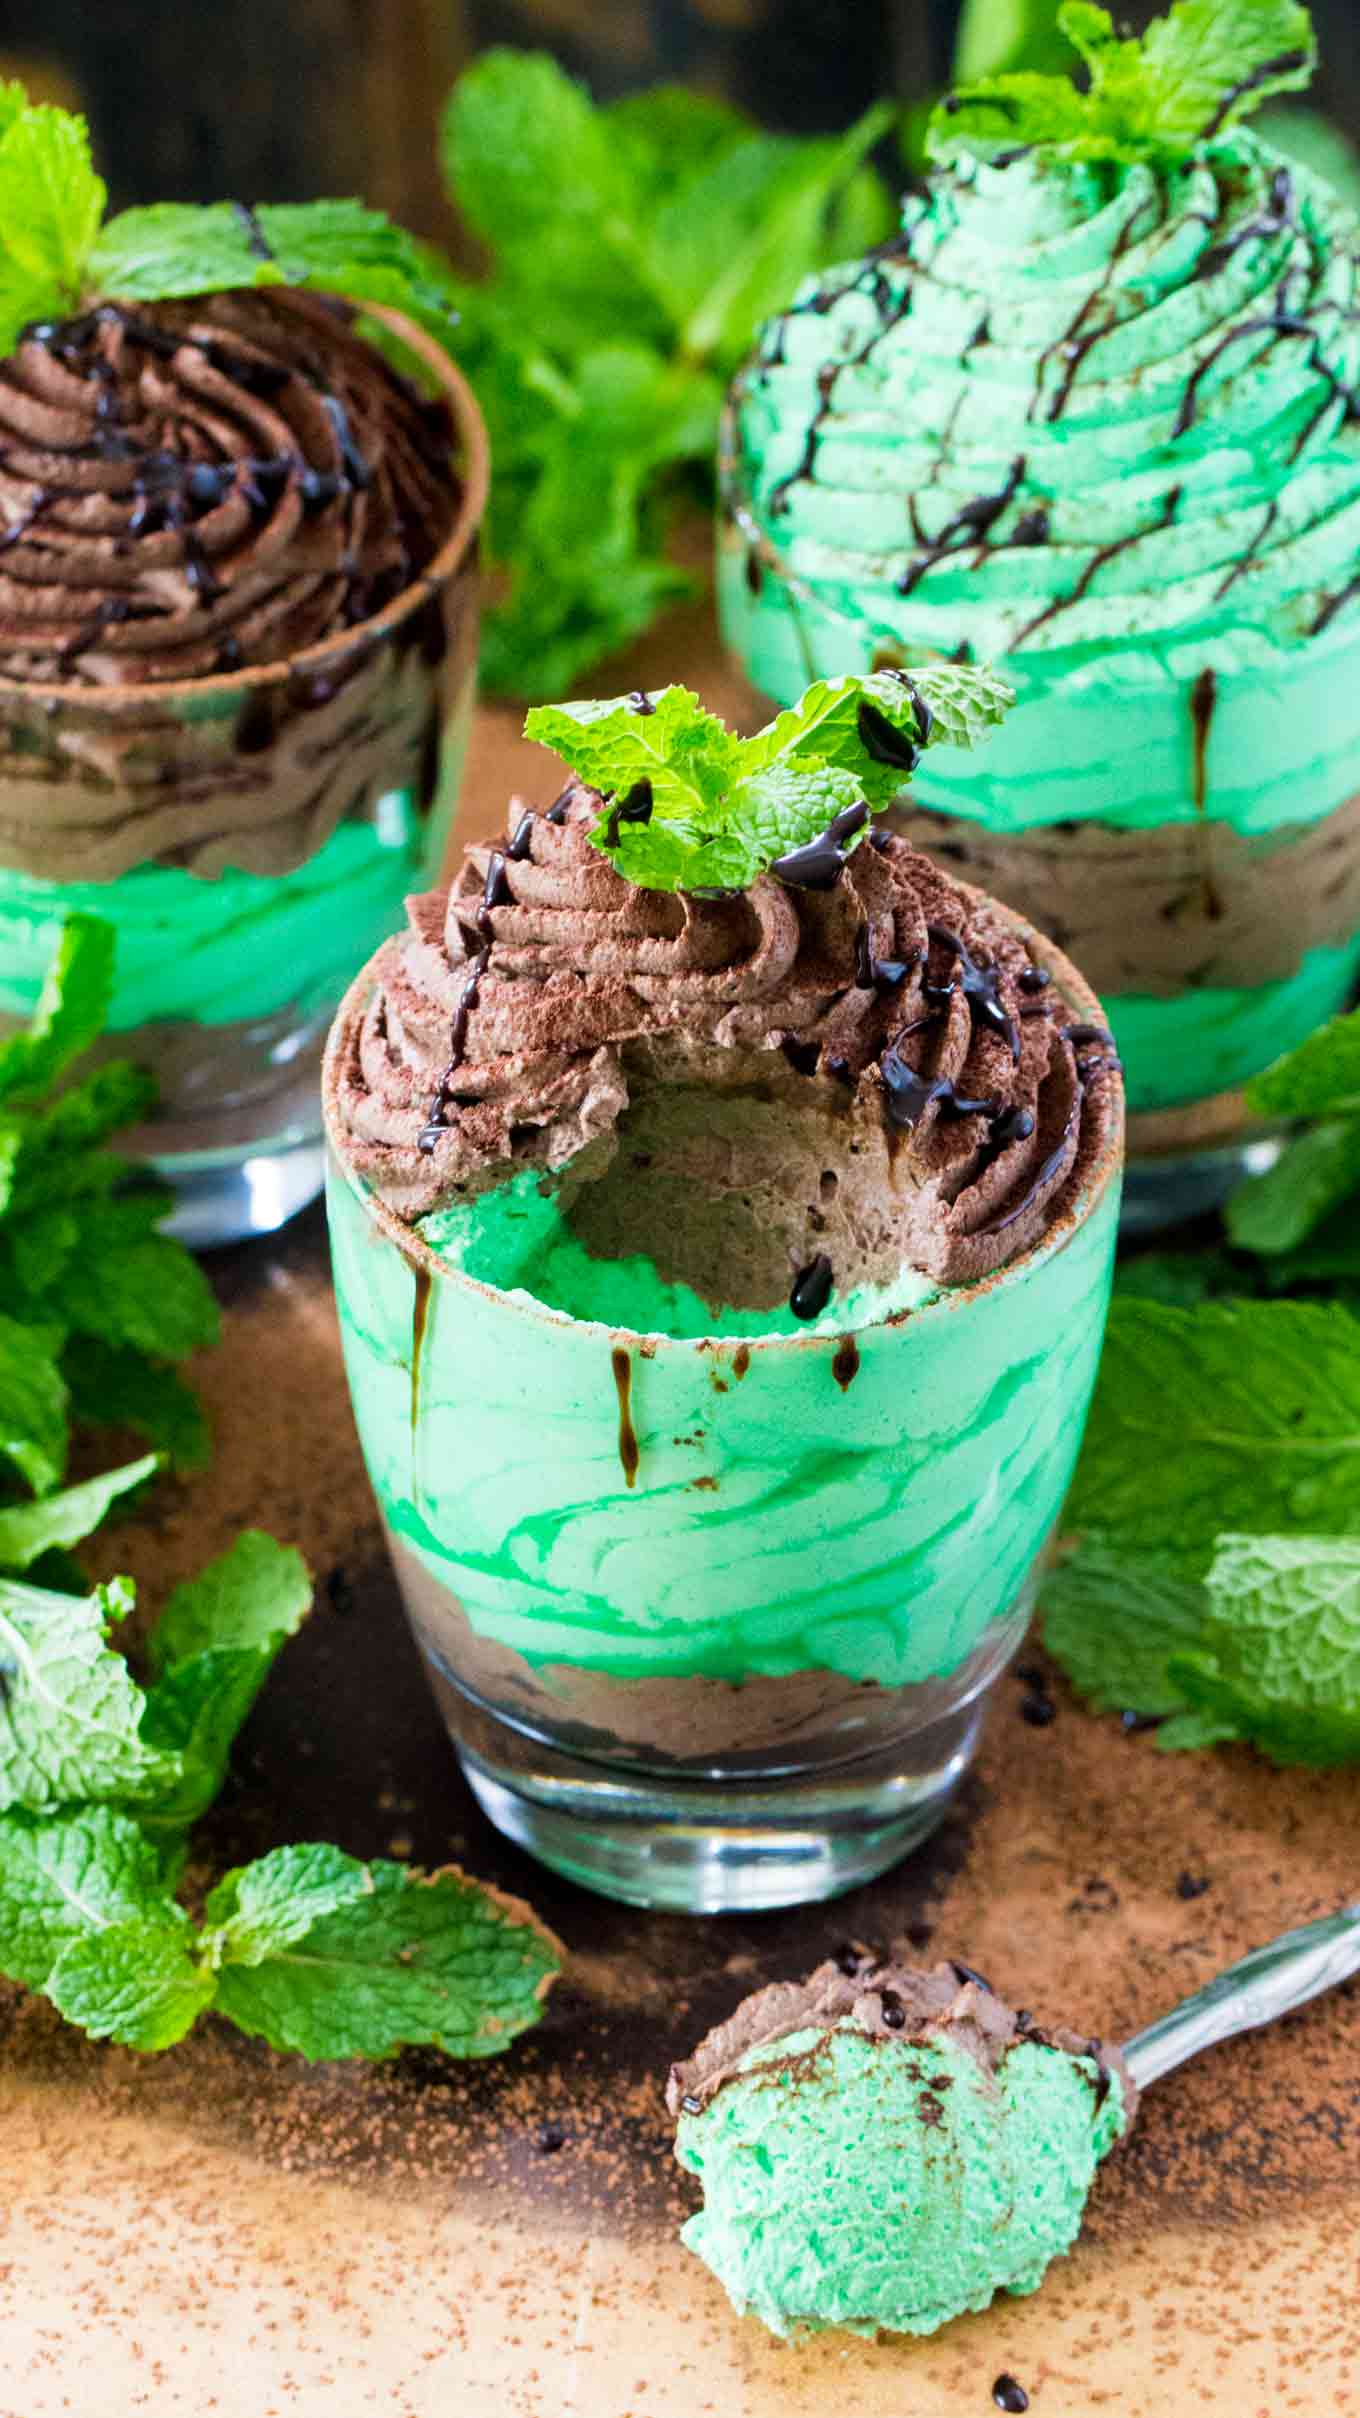 10 Minute Chocolate Mint Mousse made with just a few ingredients is a flavorful and creamy take on the classic, more labor intensive mousse. 